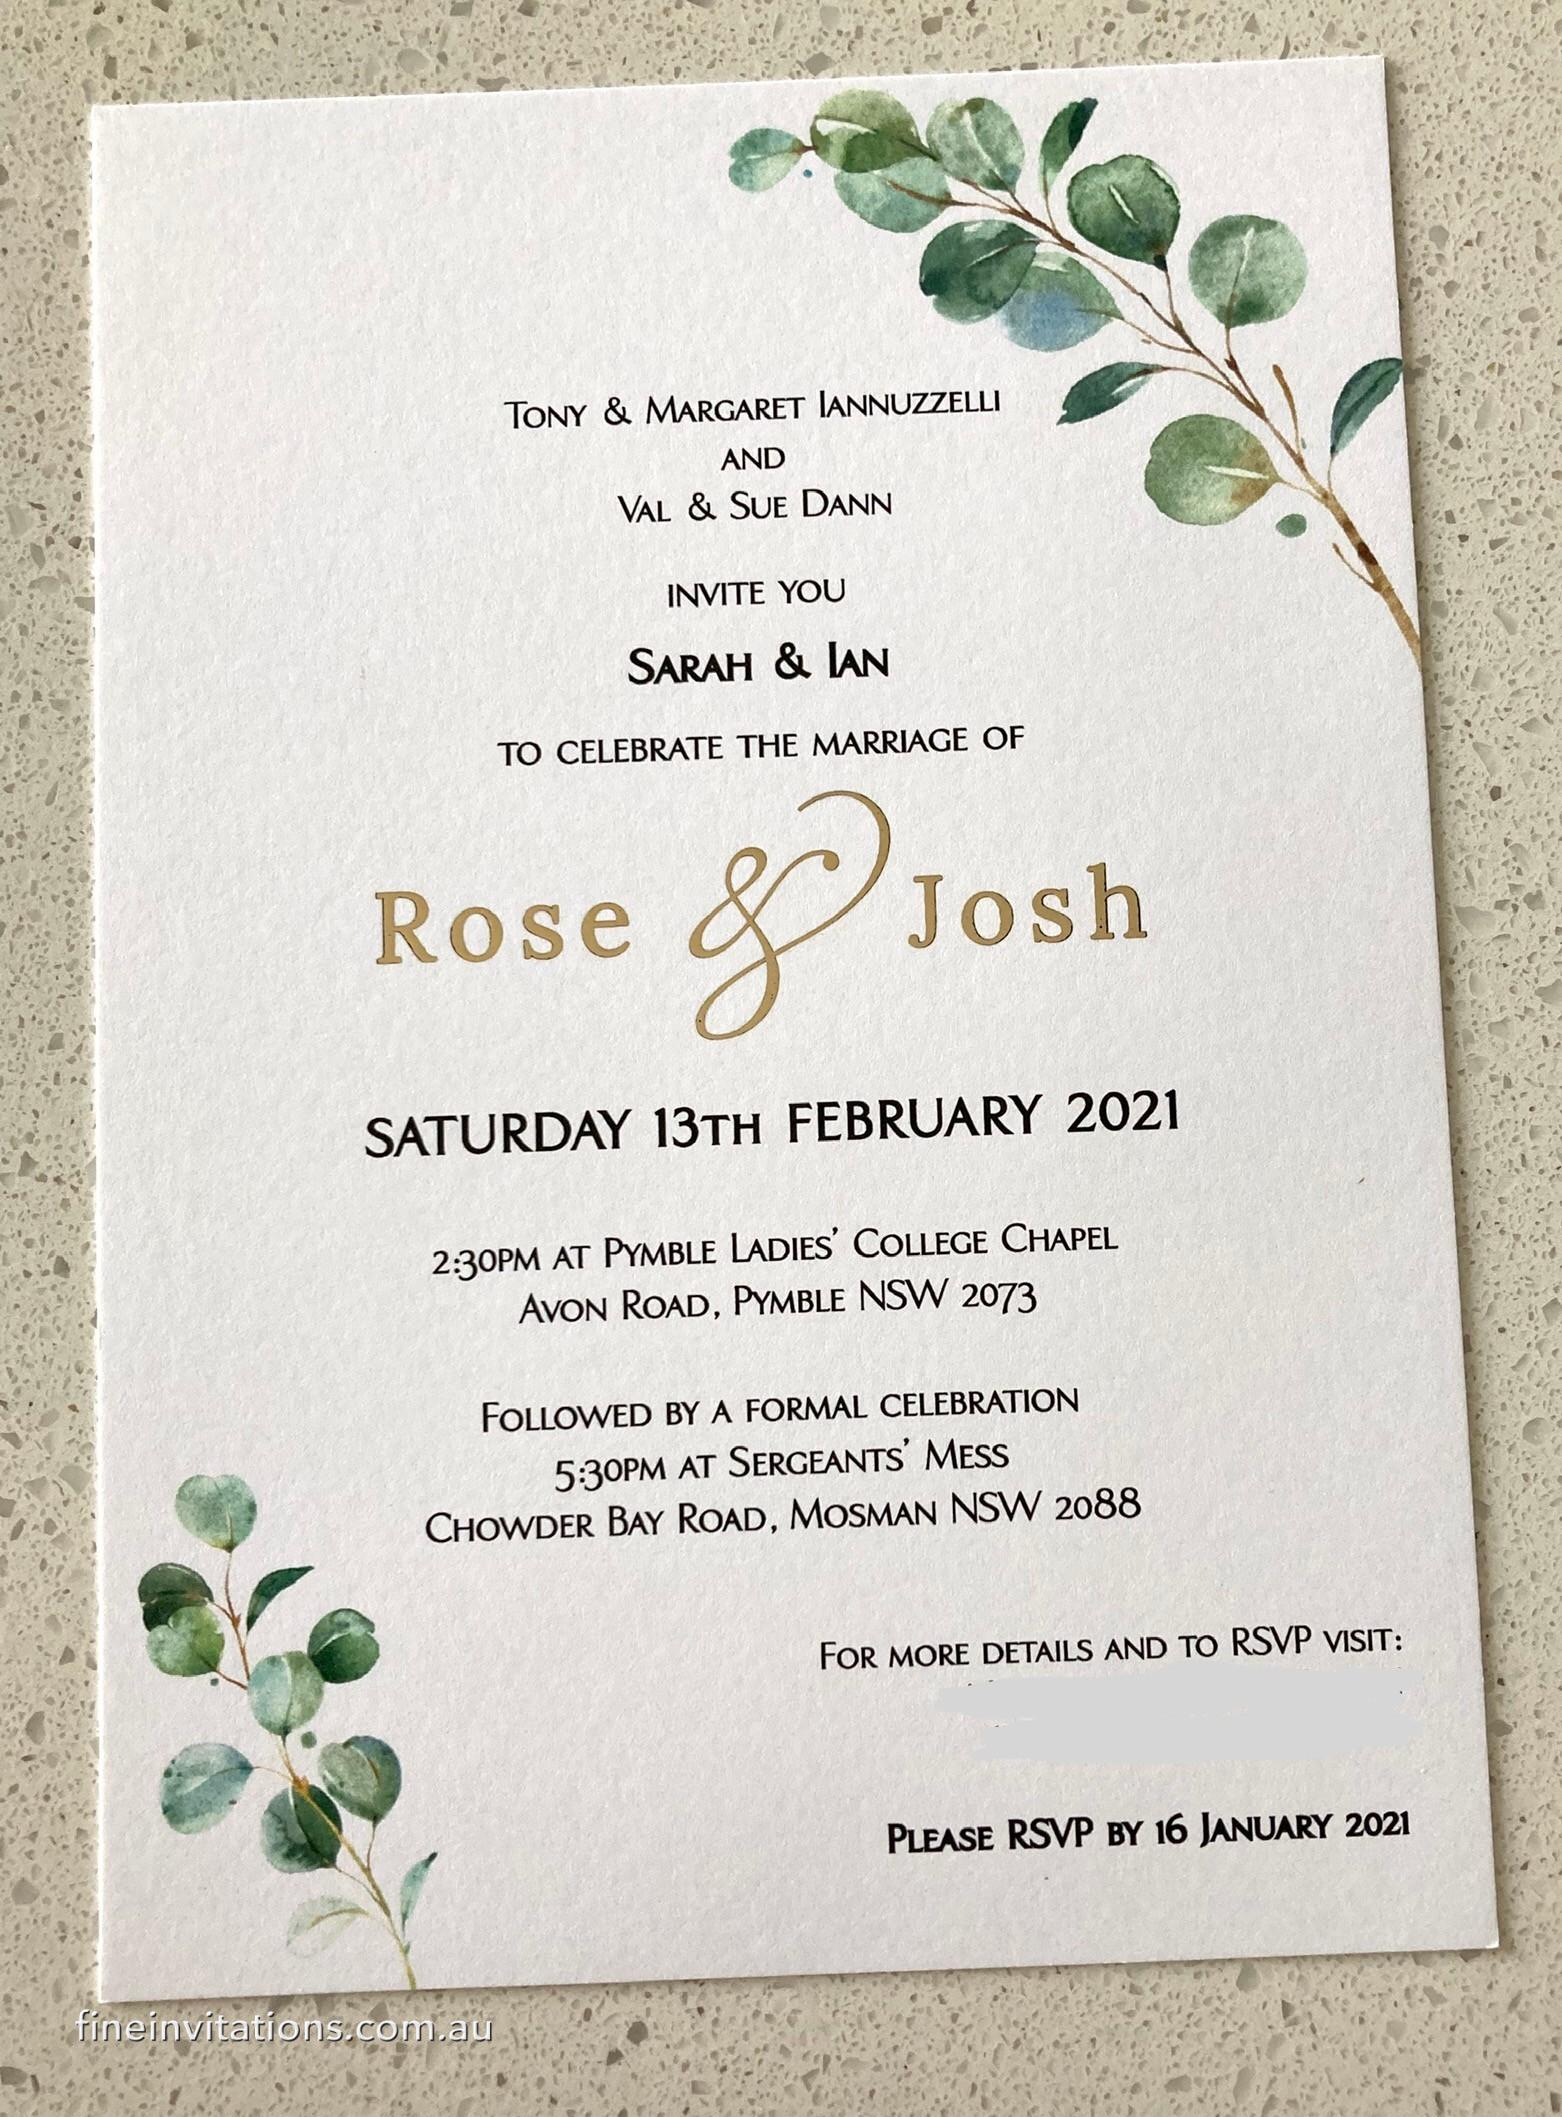 Sydney wedding invite gold foil and leaves